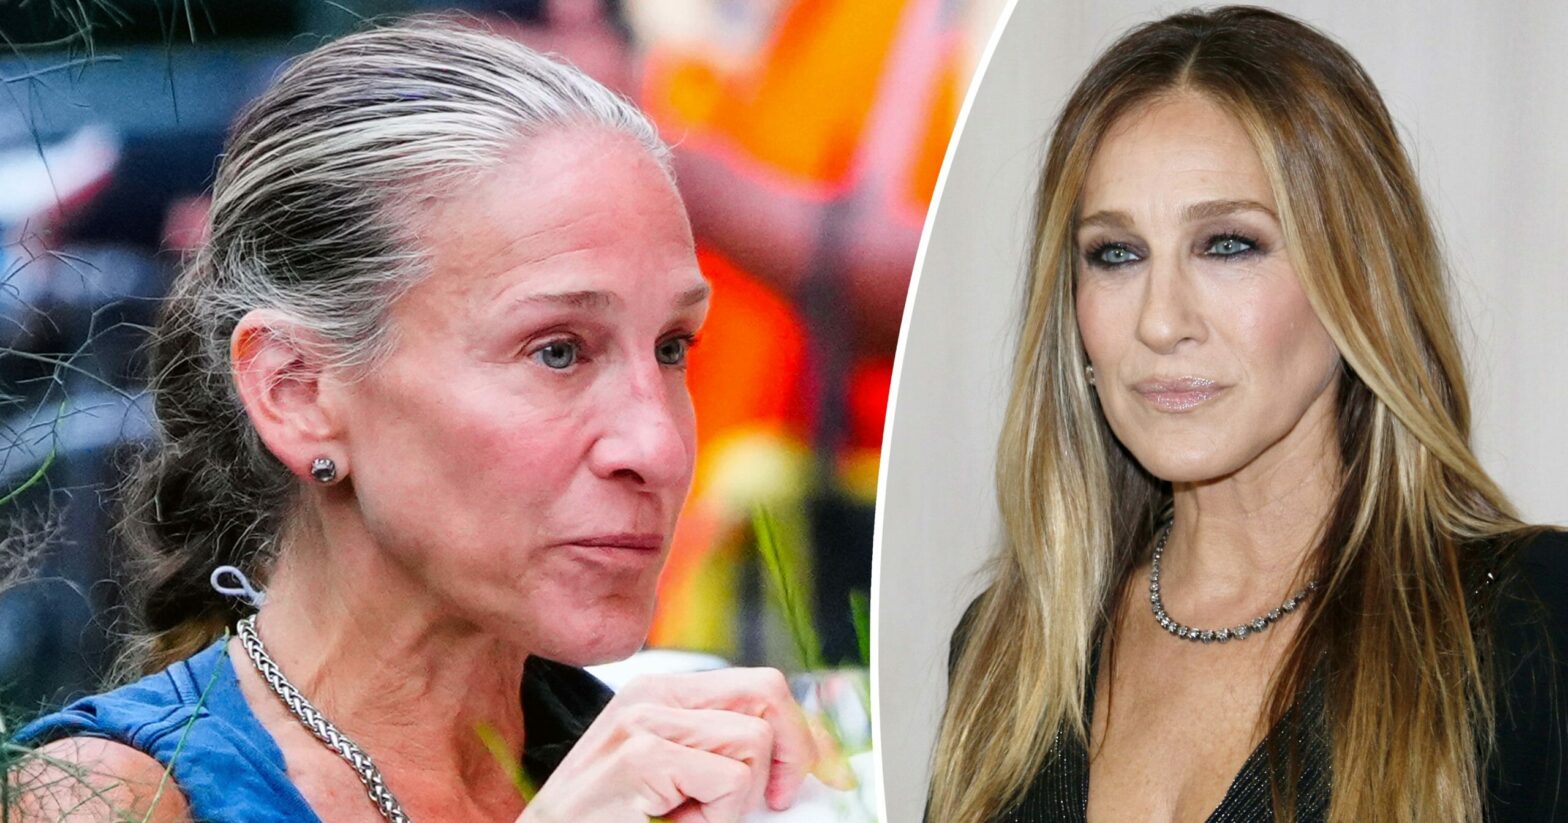 You are currently viewing The picture of Sarah Jessica Parker without makeup shows how beautiful she is without it.